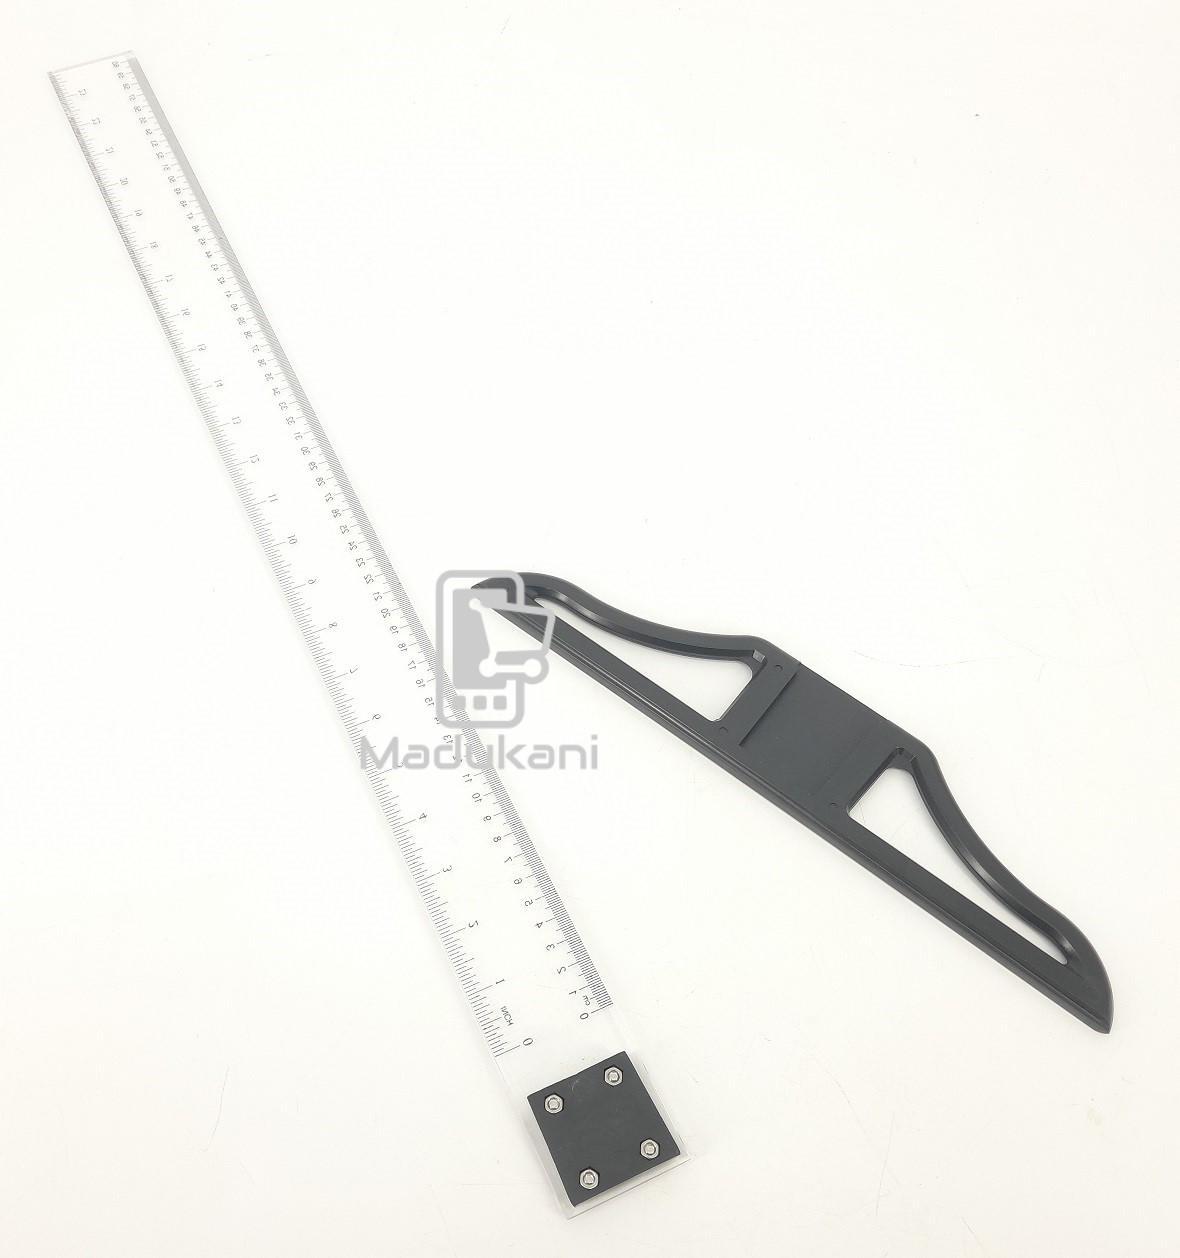 Technical Drawing T Square, 60cm, Clear, with Detachable Head